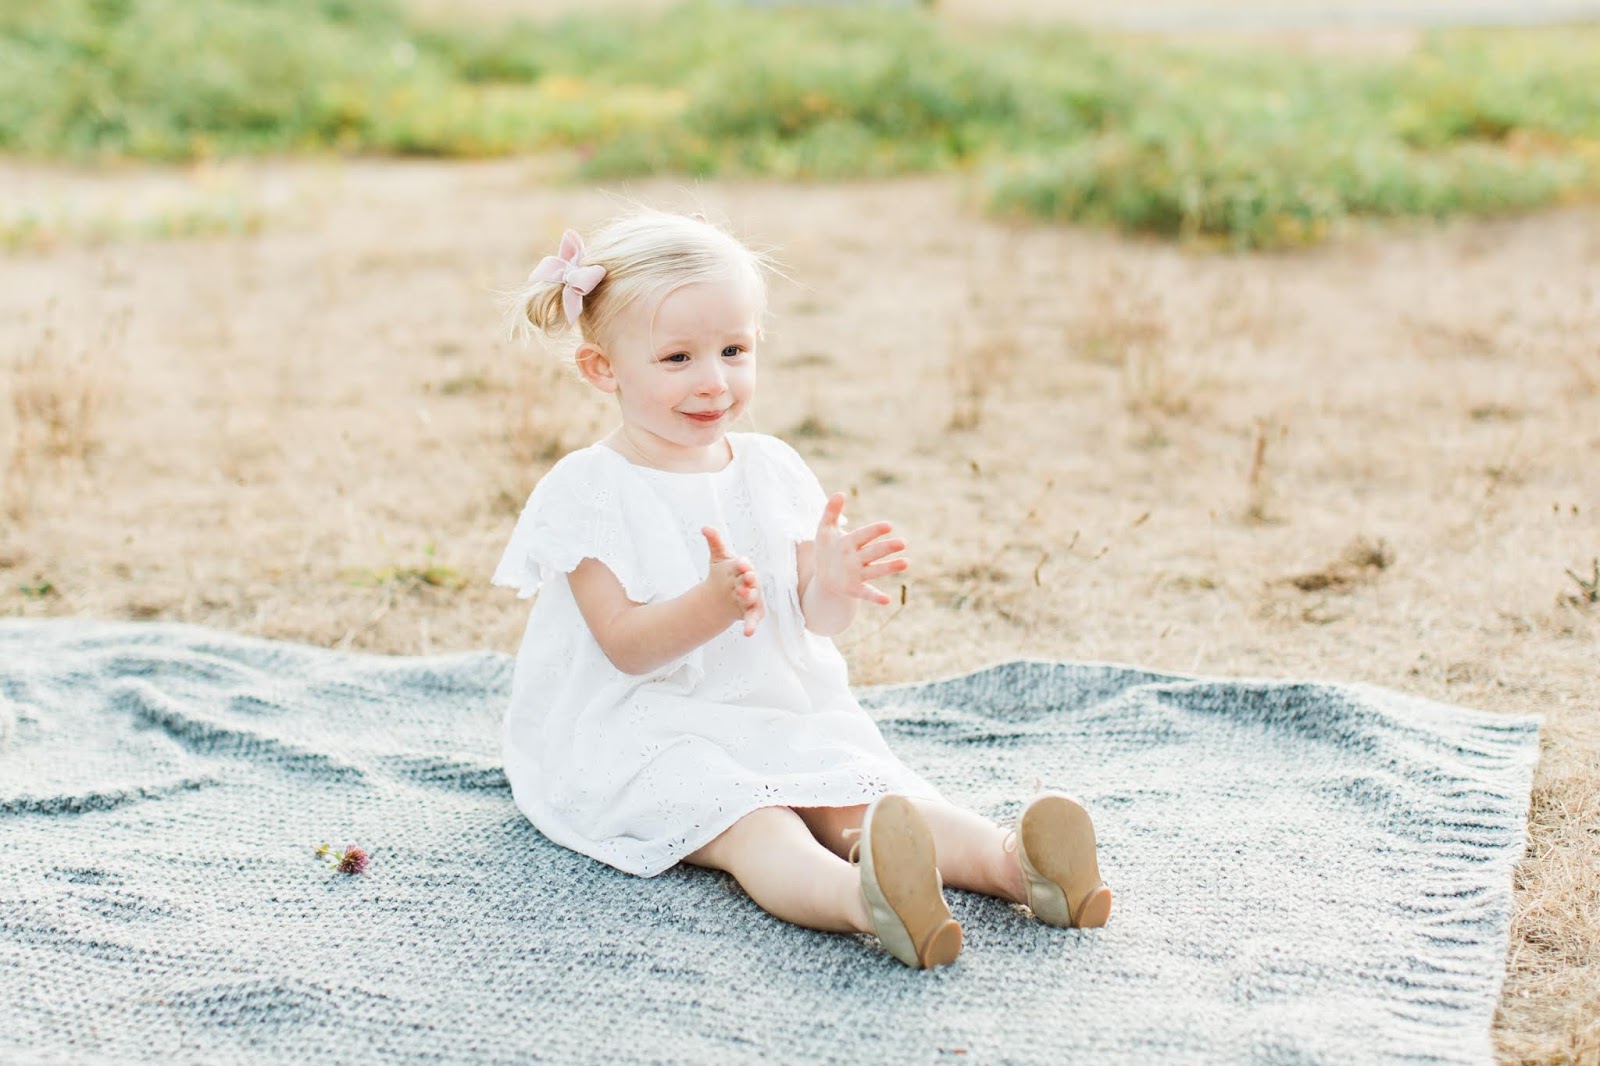 5 tips on family photos with a toddler, baby